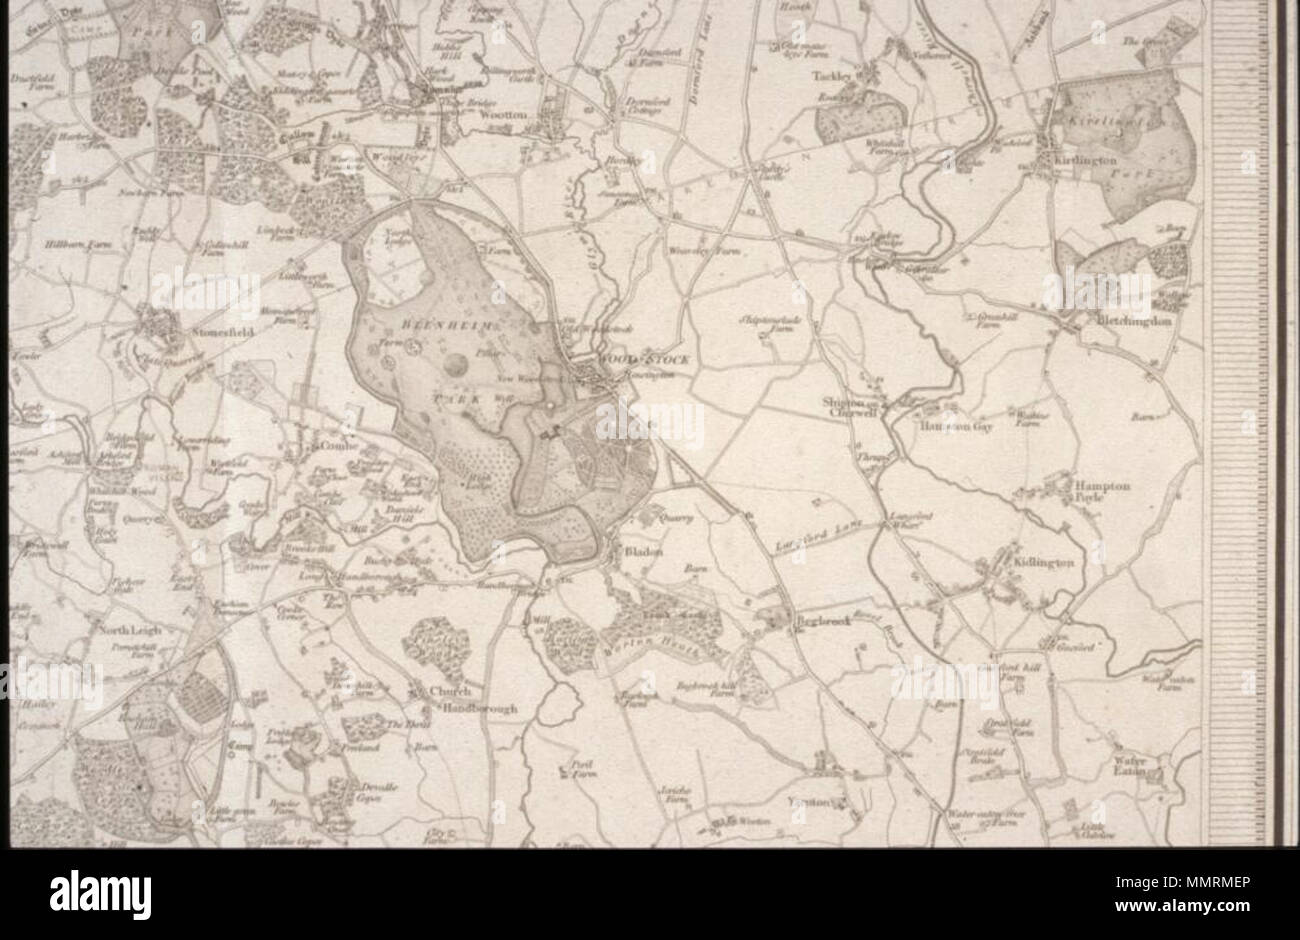 . Area centred on Woodstock and Blenheim Park, West Oxfordshire at 1:63,360 / one inch to one mile  [Blenheim and Woodstock]-Ordnance Survey 1-inch first edition. 1833. Bodleian Libraries, Blenheim and Woodstock Stock Photo